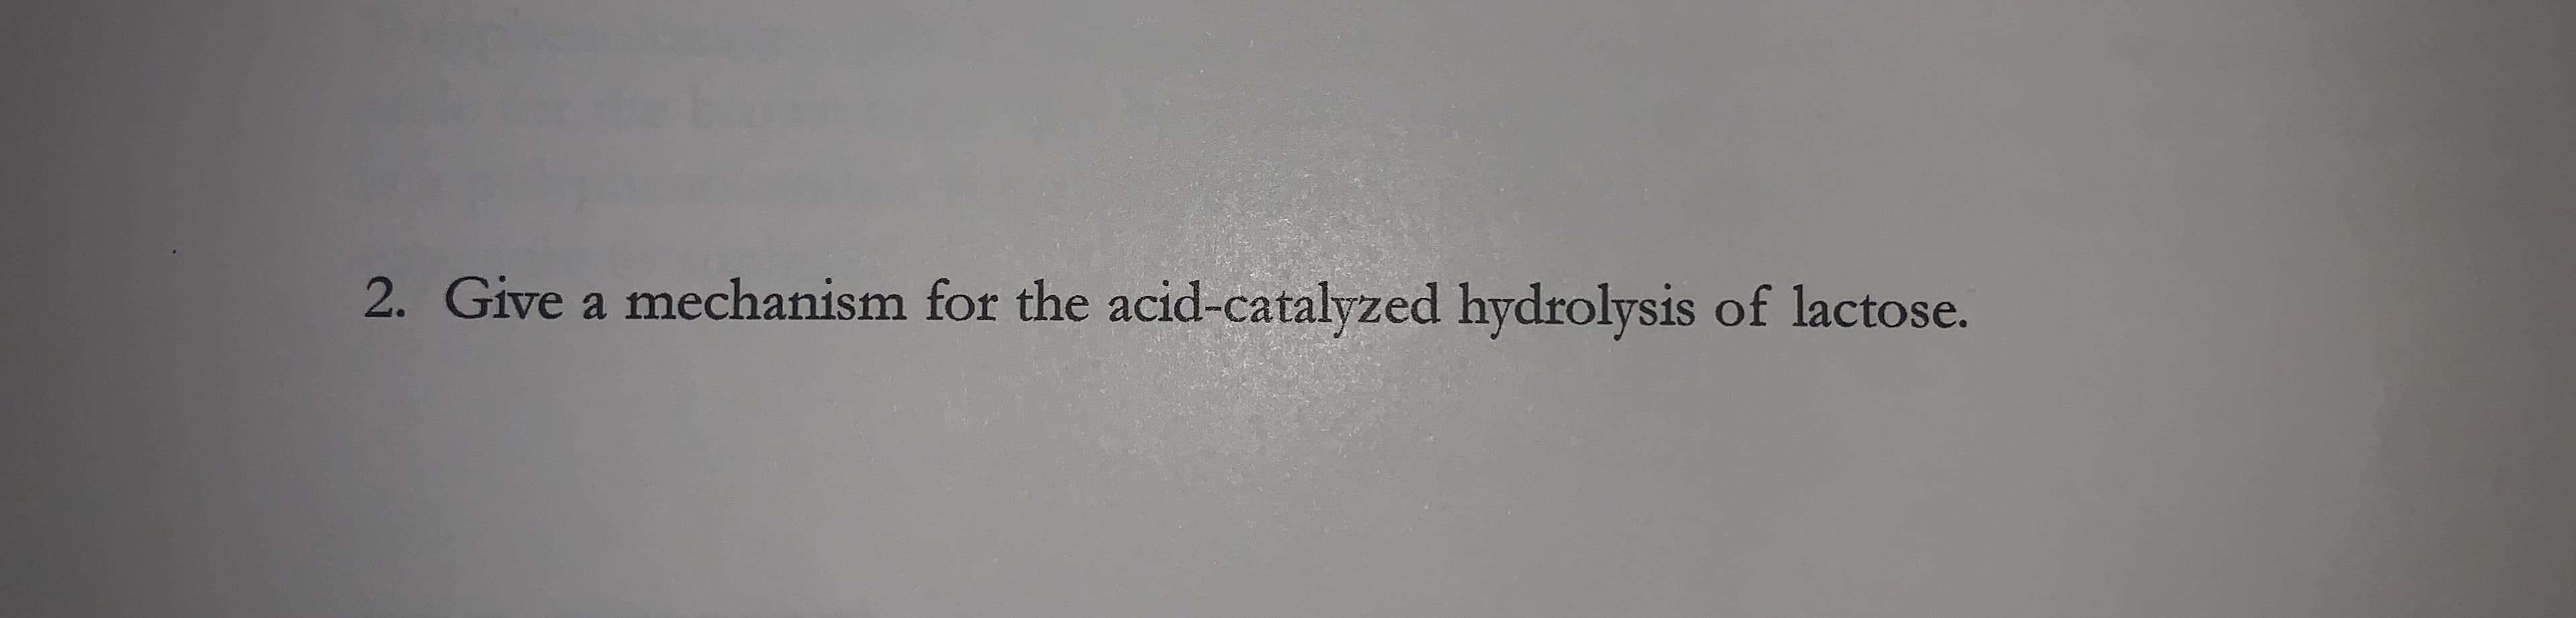 2. Give a mechanism for the acid-catalyzed hydrolysis of lactose.
